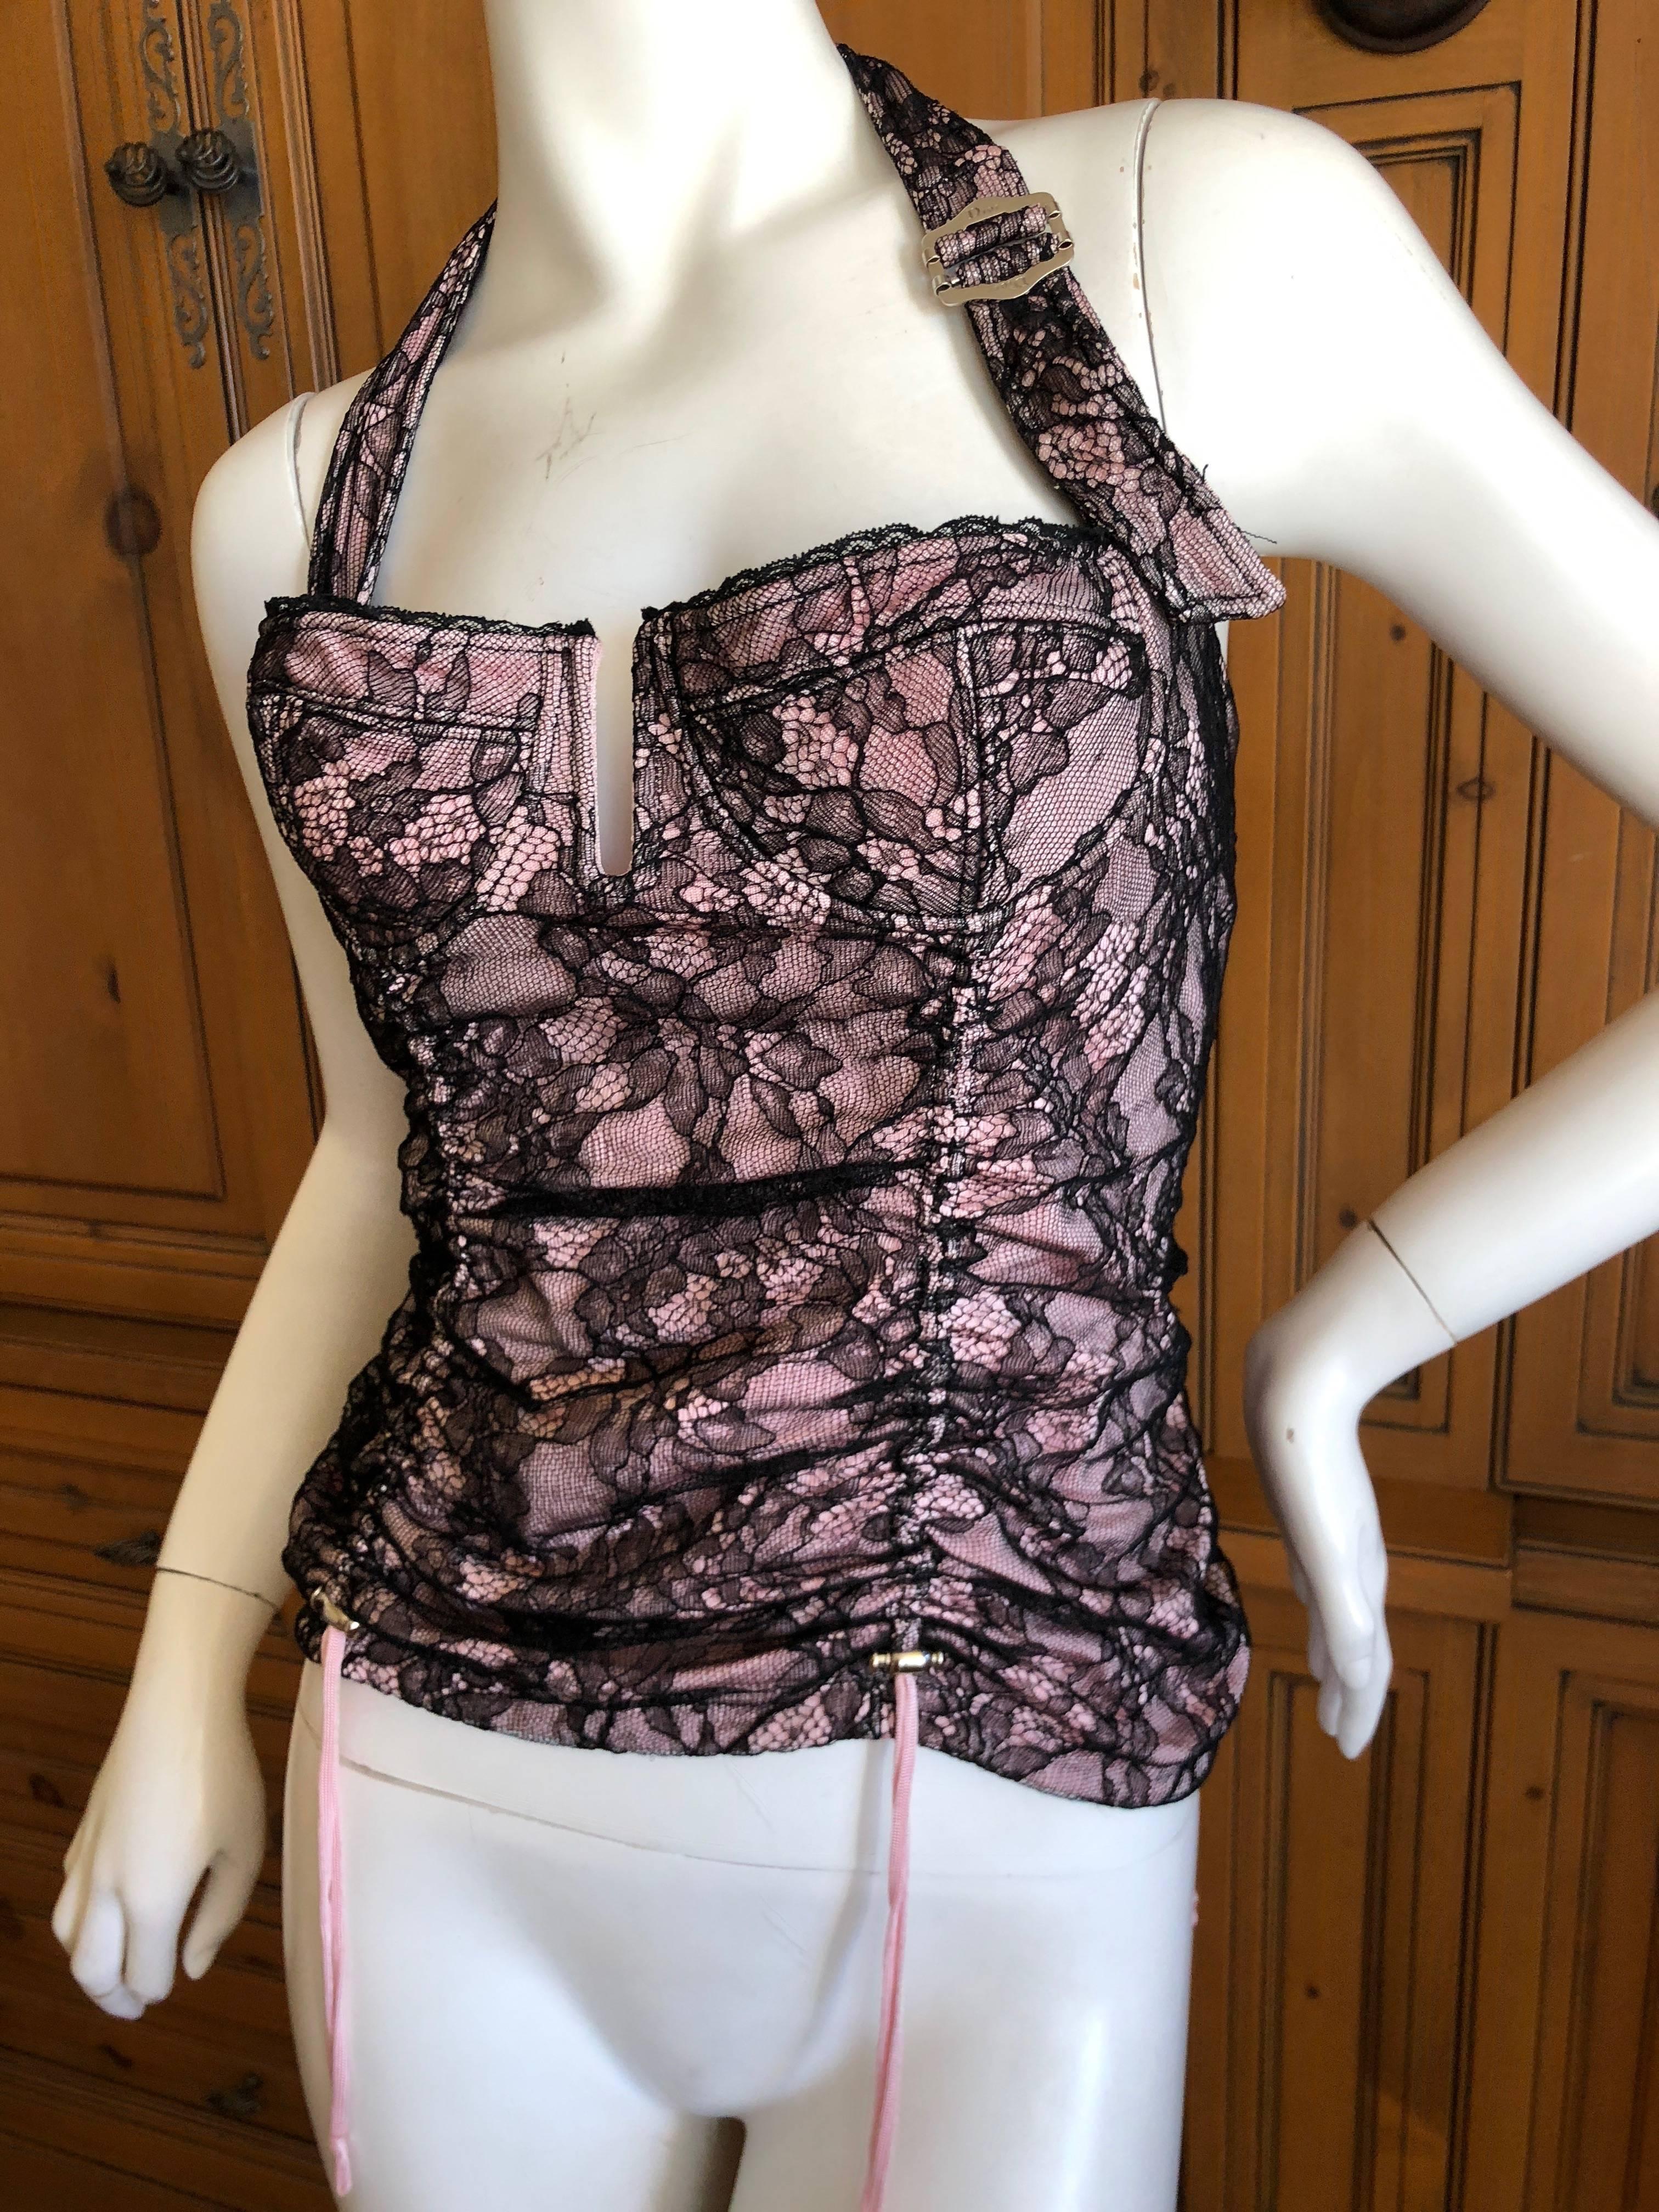 Christian Dior Spring 2004 by John Galliano Vintage Lace Overlay Corset Bustier In Excellent Condition For Sale In Cloverdale, CA